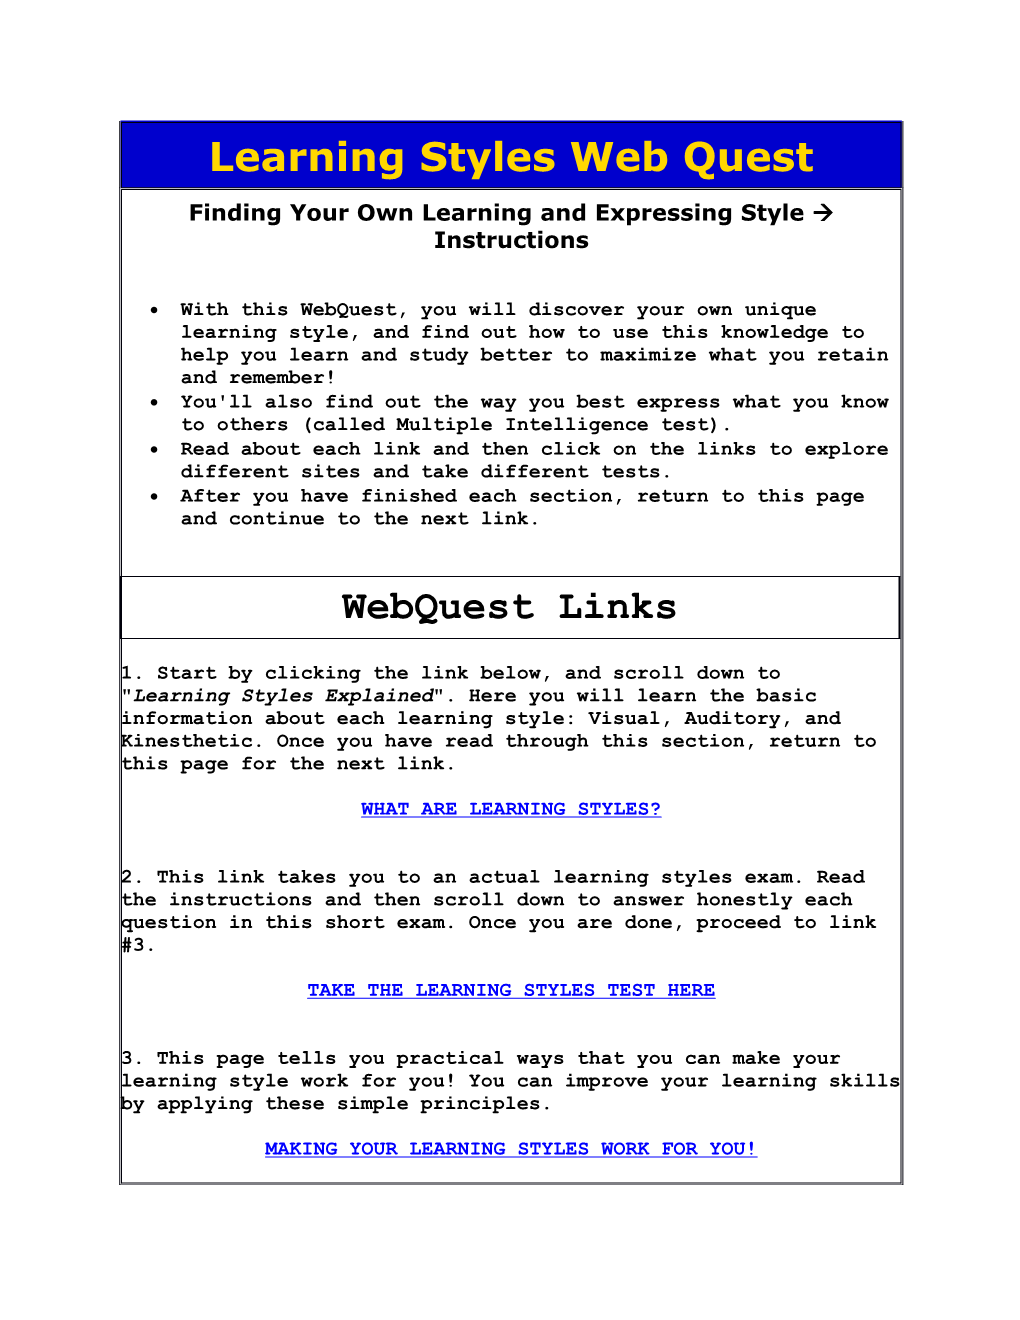 With This Webquest, You Will Discover Your Own Unique Learning Style, and Find out How